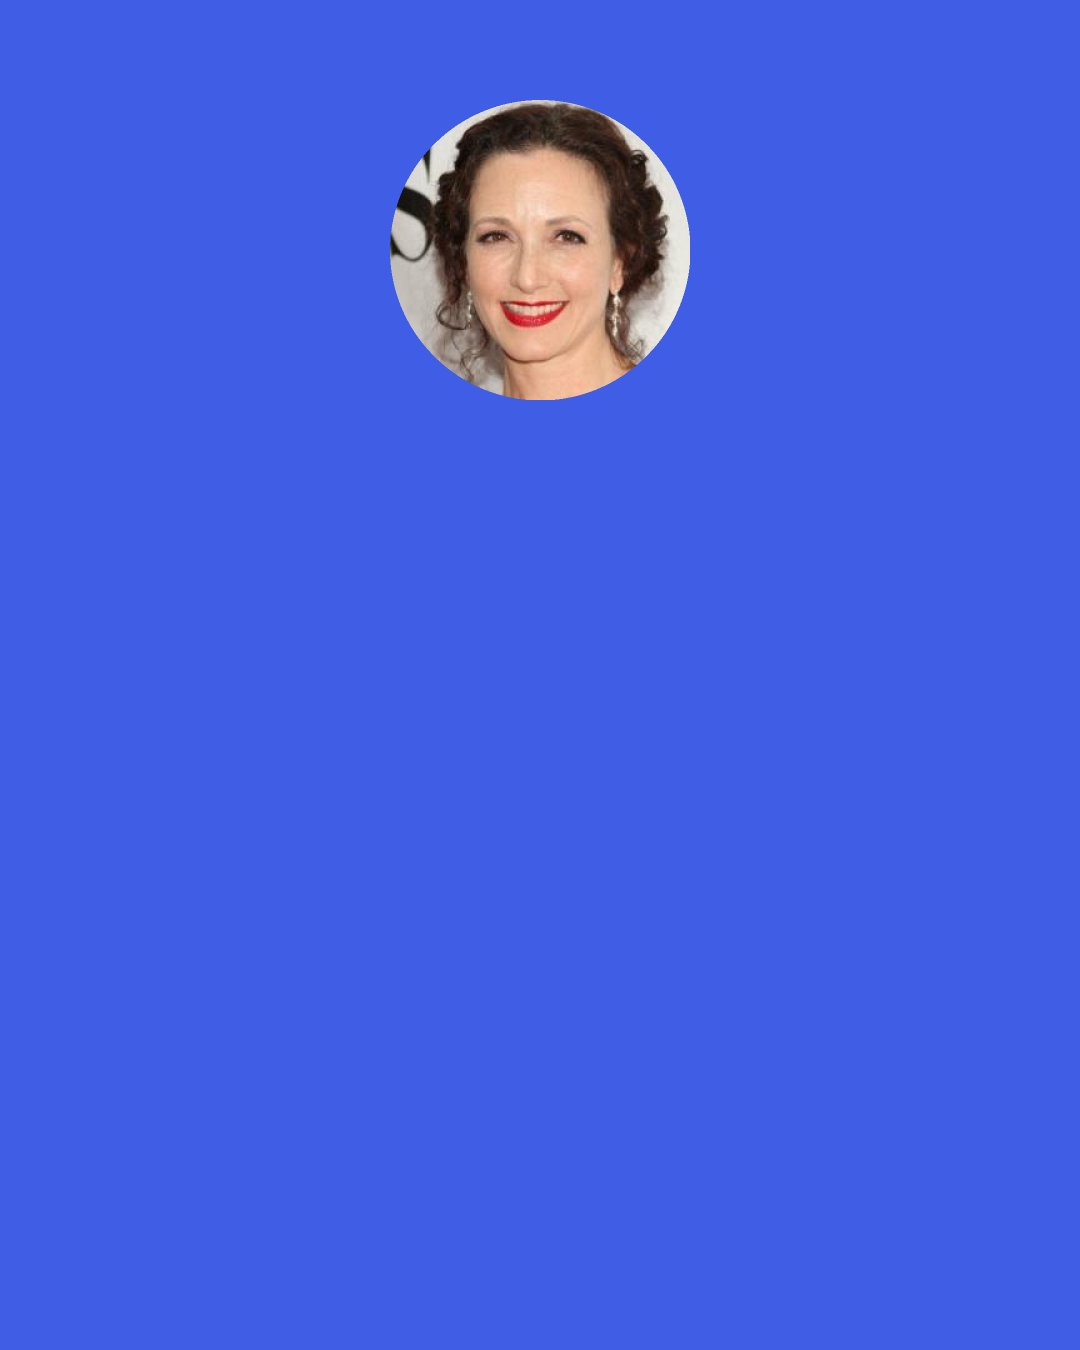 Bebe Neuwirth: I made jokes about kissing Murphy Brown. But if that's what cost me my job, my wife will probably say, "Hey asshole, I told you so".